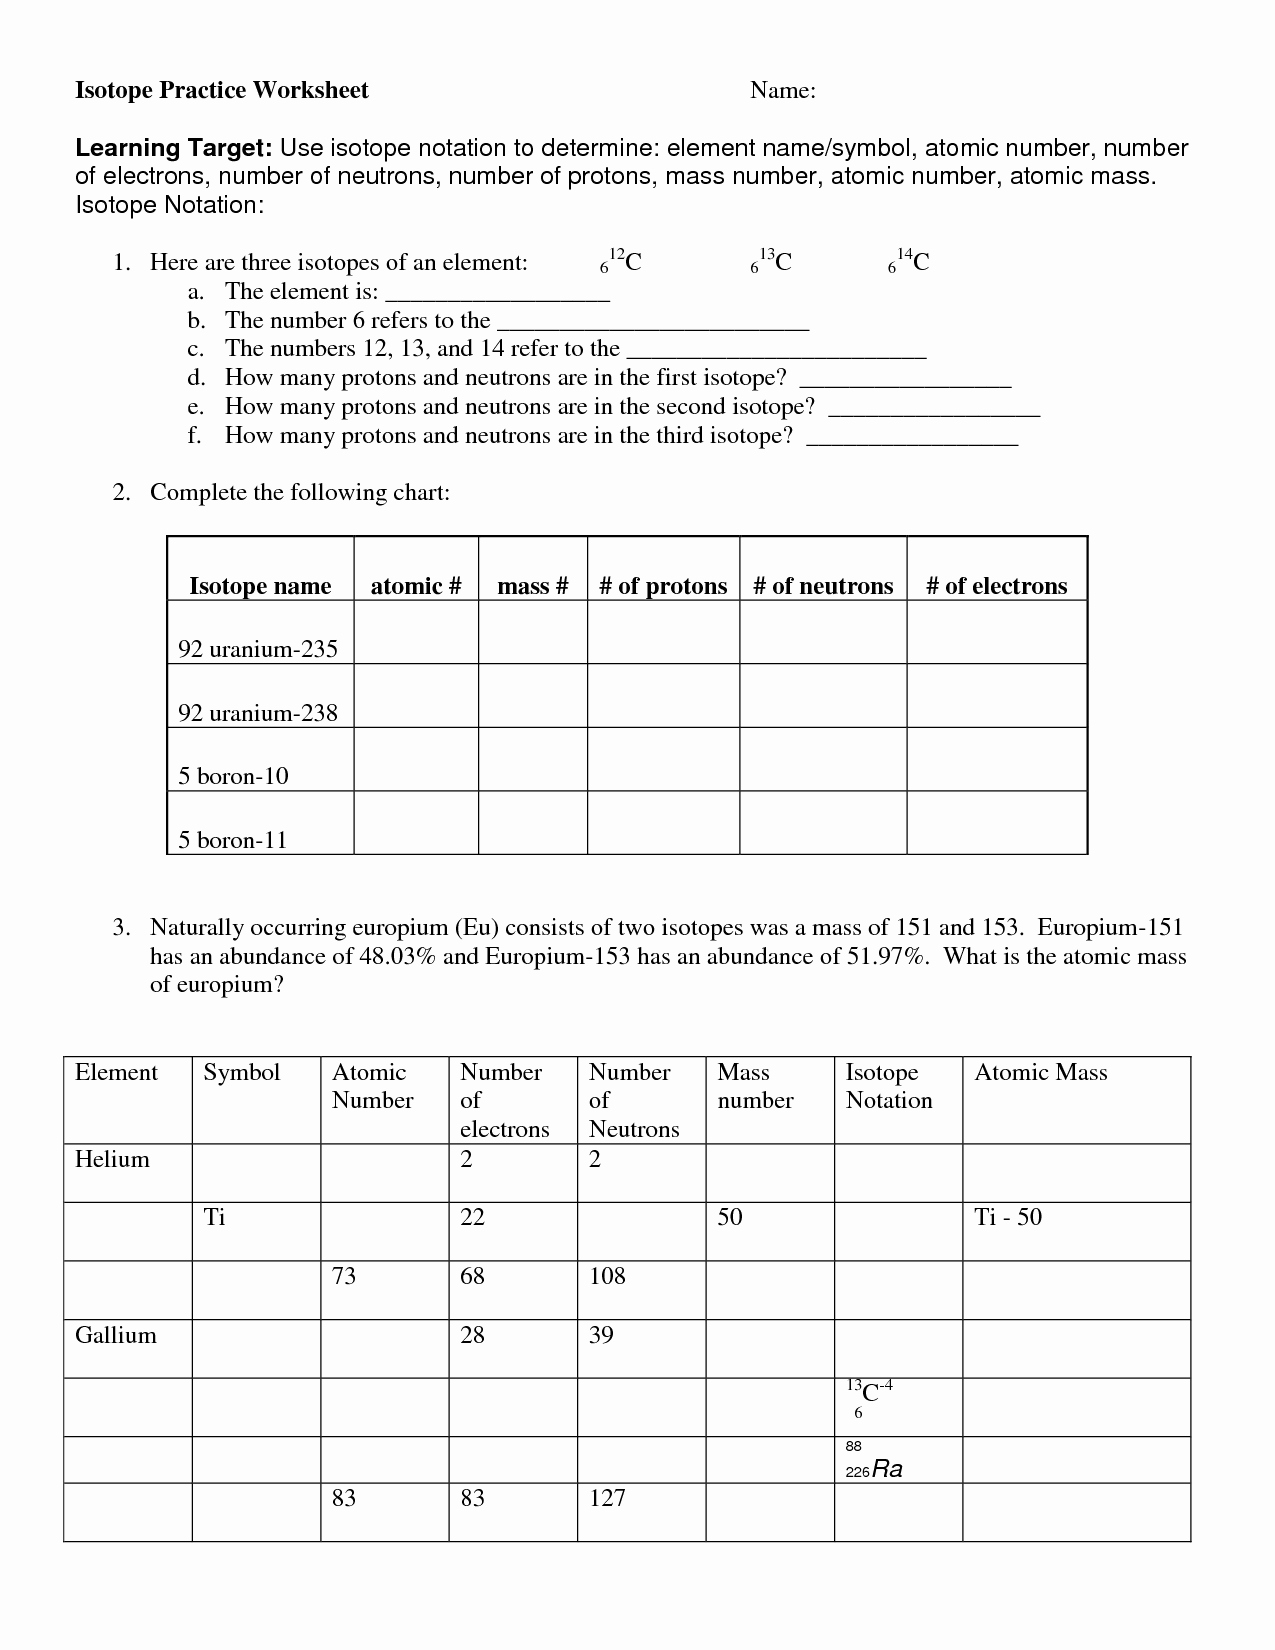 Isotope Practice Worksheet Answers Luxury 12 Best Of Periodic Table Practice Worksheet